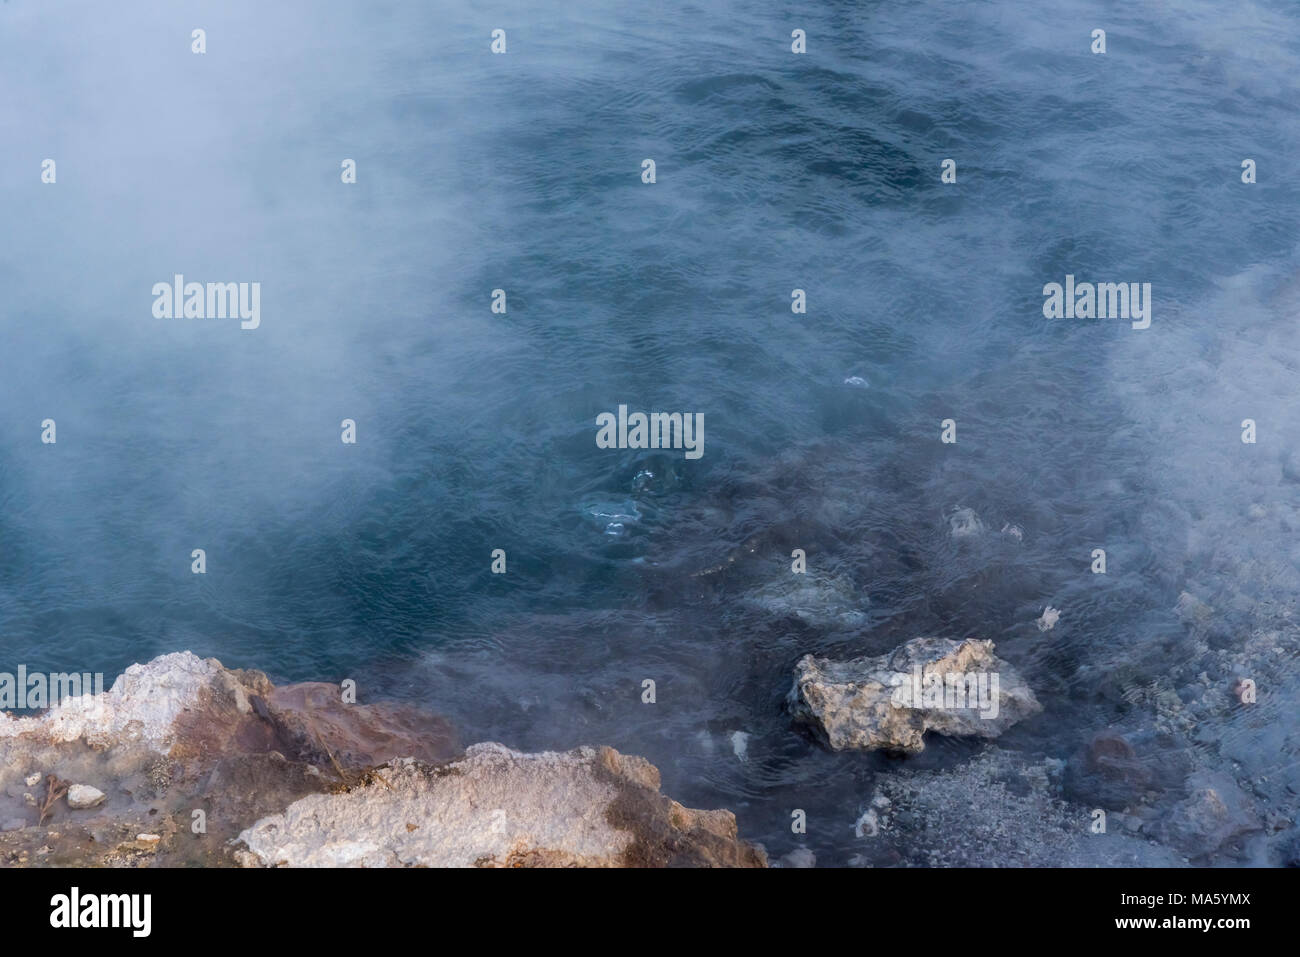 Boiling hot spring with steam rising up off the surface of the water. Stock Photo